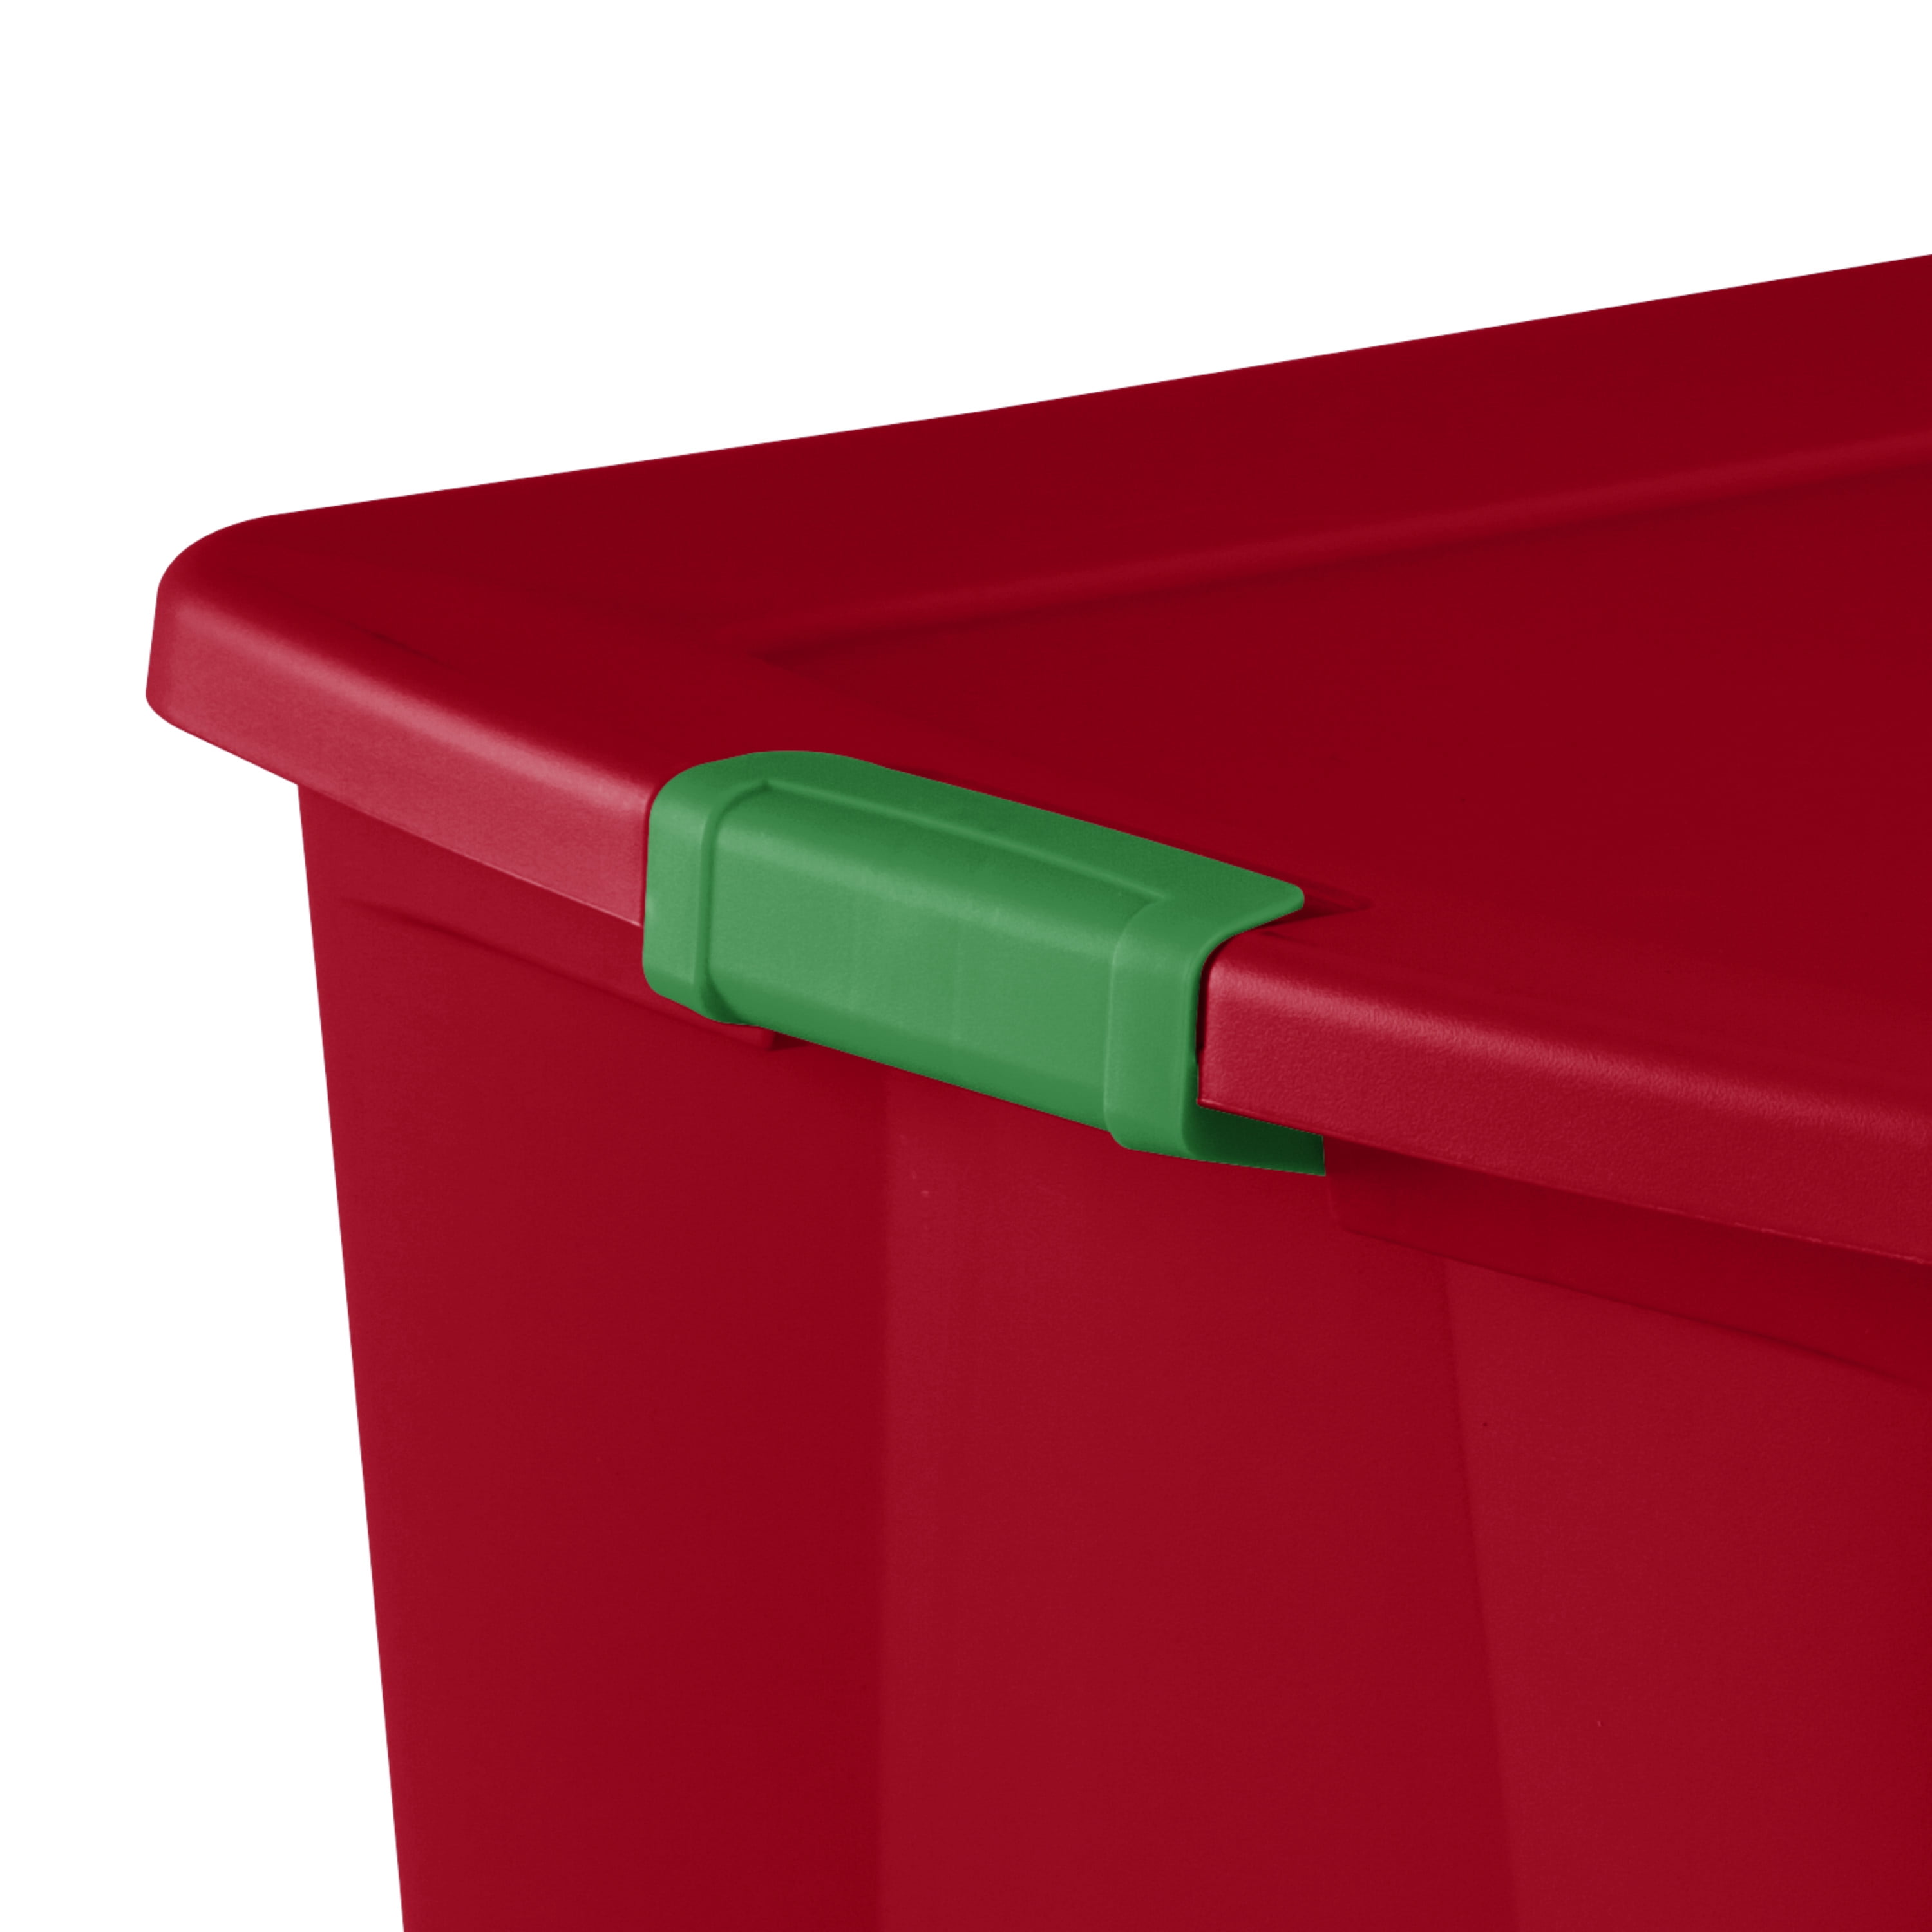 Sterilite 56-Quart Wheeled Latching Storage Tote with Rocket Red